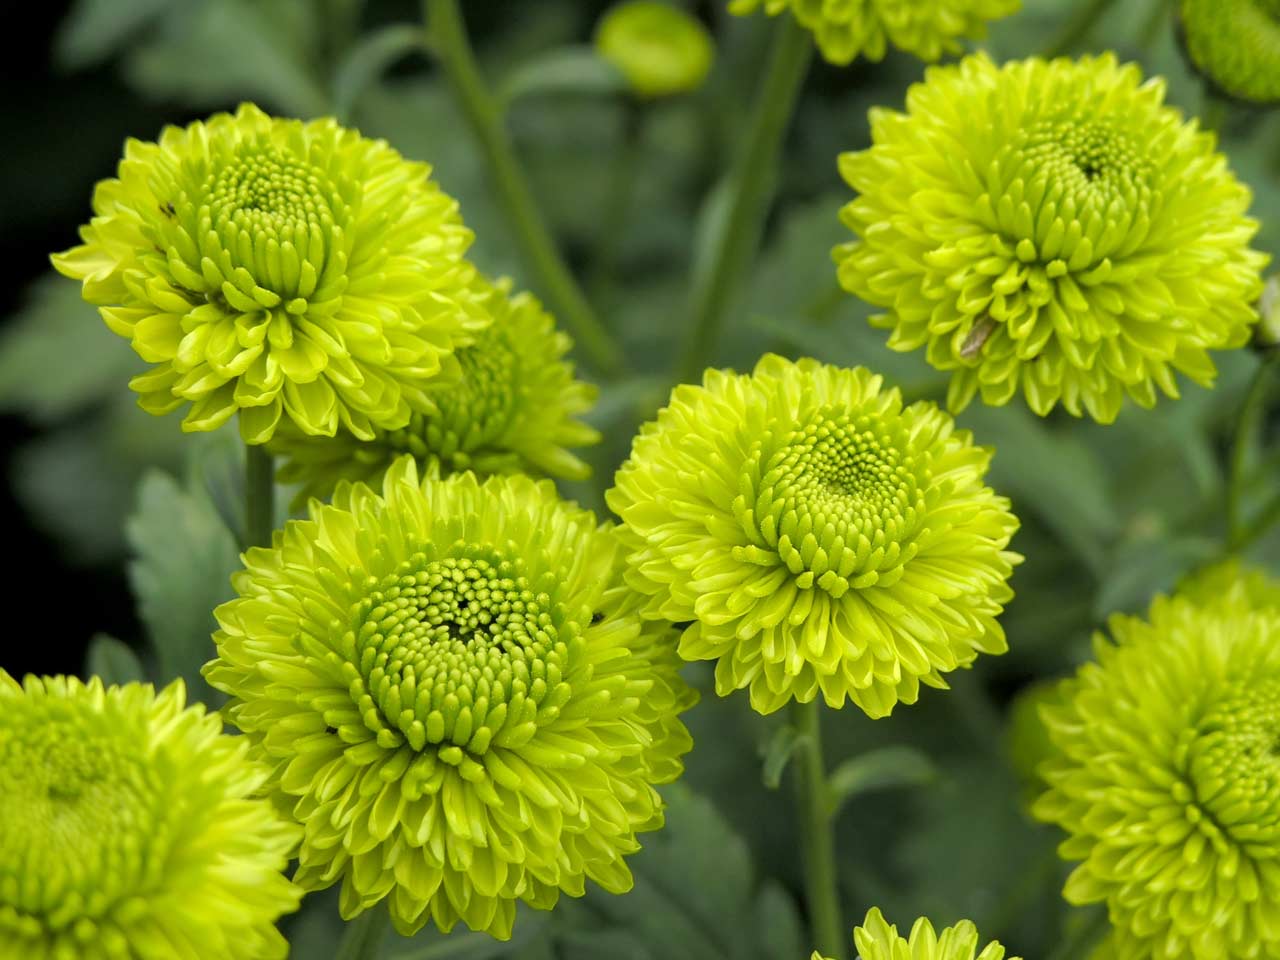 Green flowers, such as these chrysanthemums, can be strikingly 